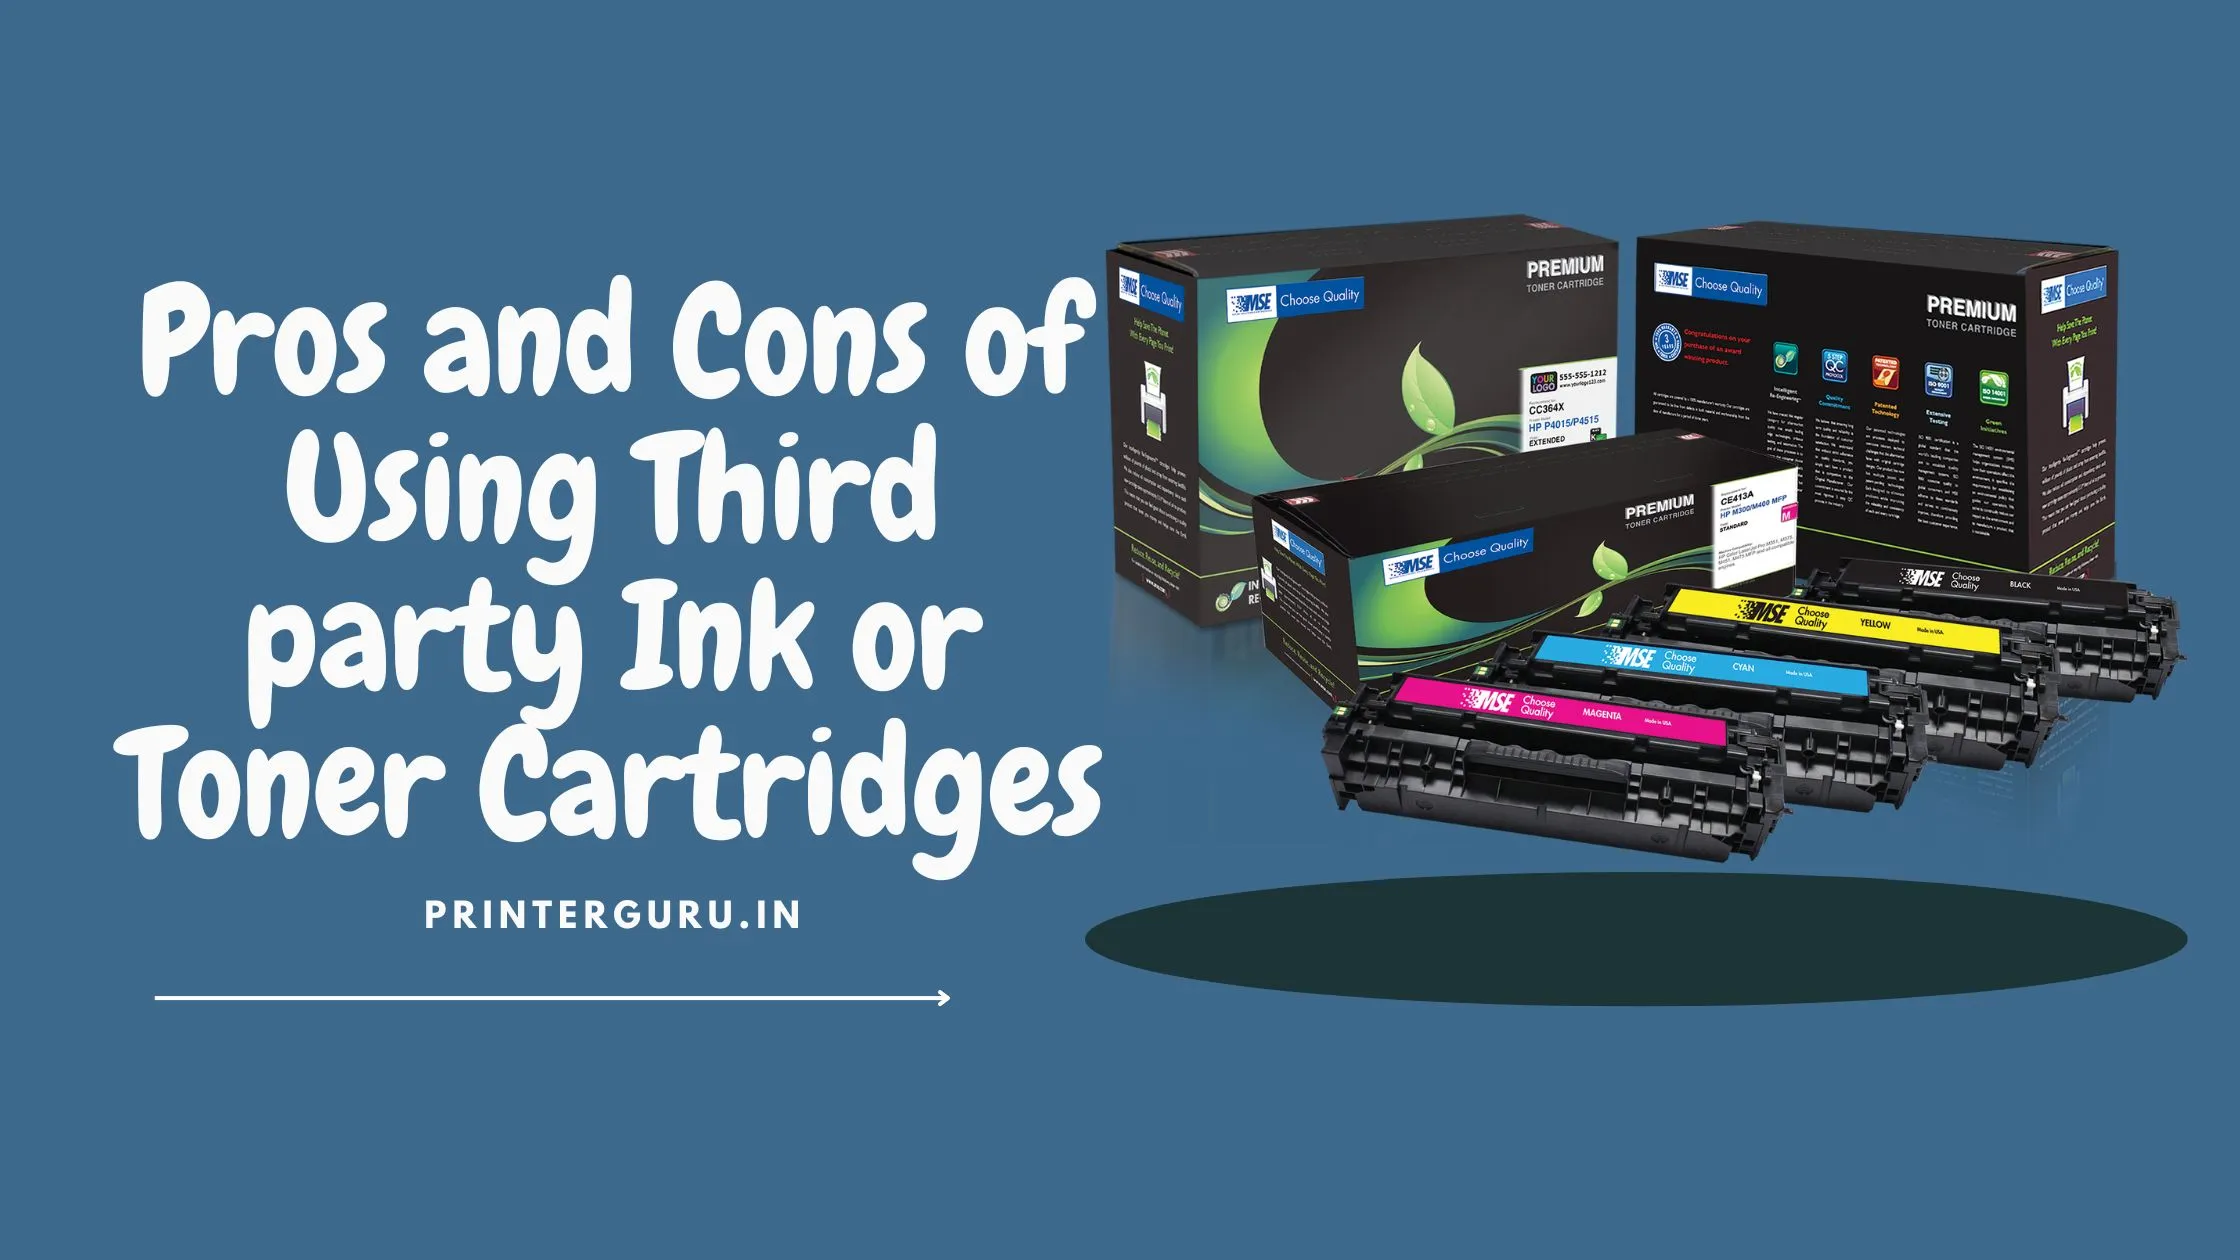 Pros and Cons of Using Third-party Ink or Toner Cartridges